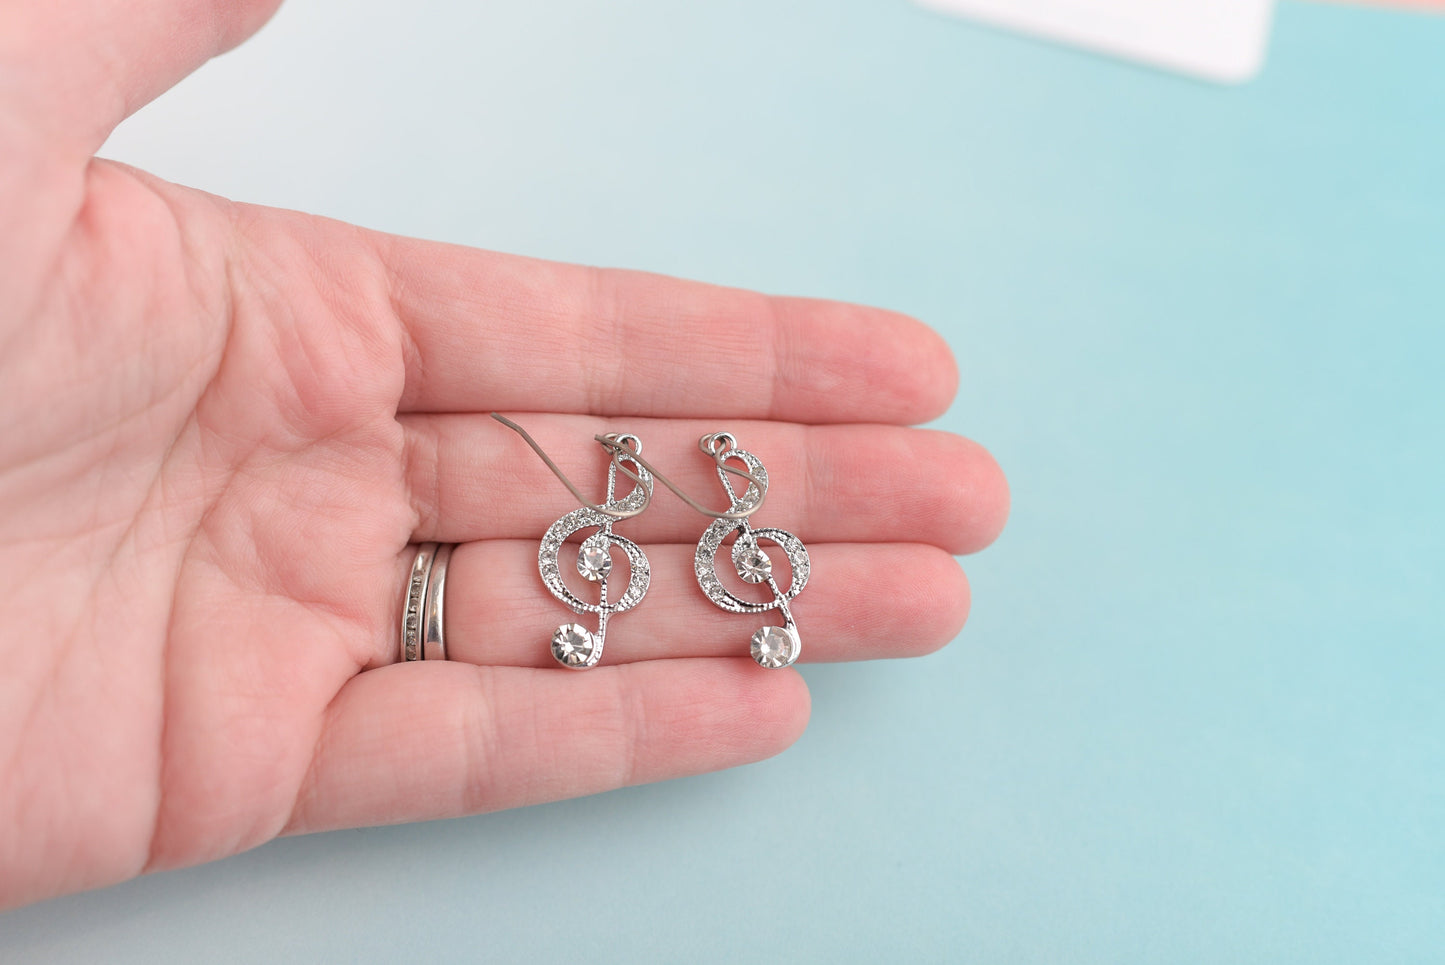 Sparkly Treble Clef Dangles with Titanium Ear Wires